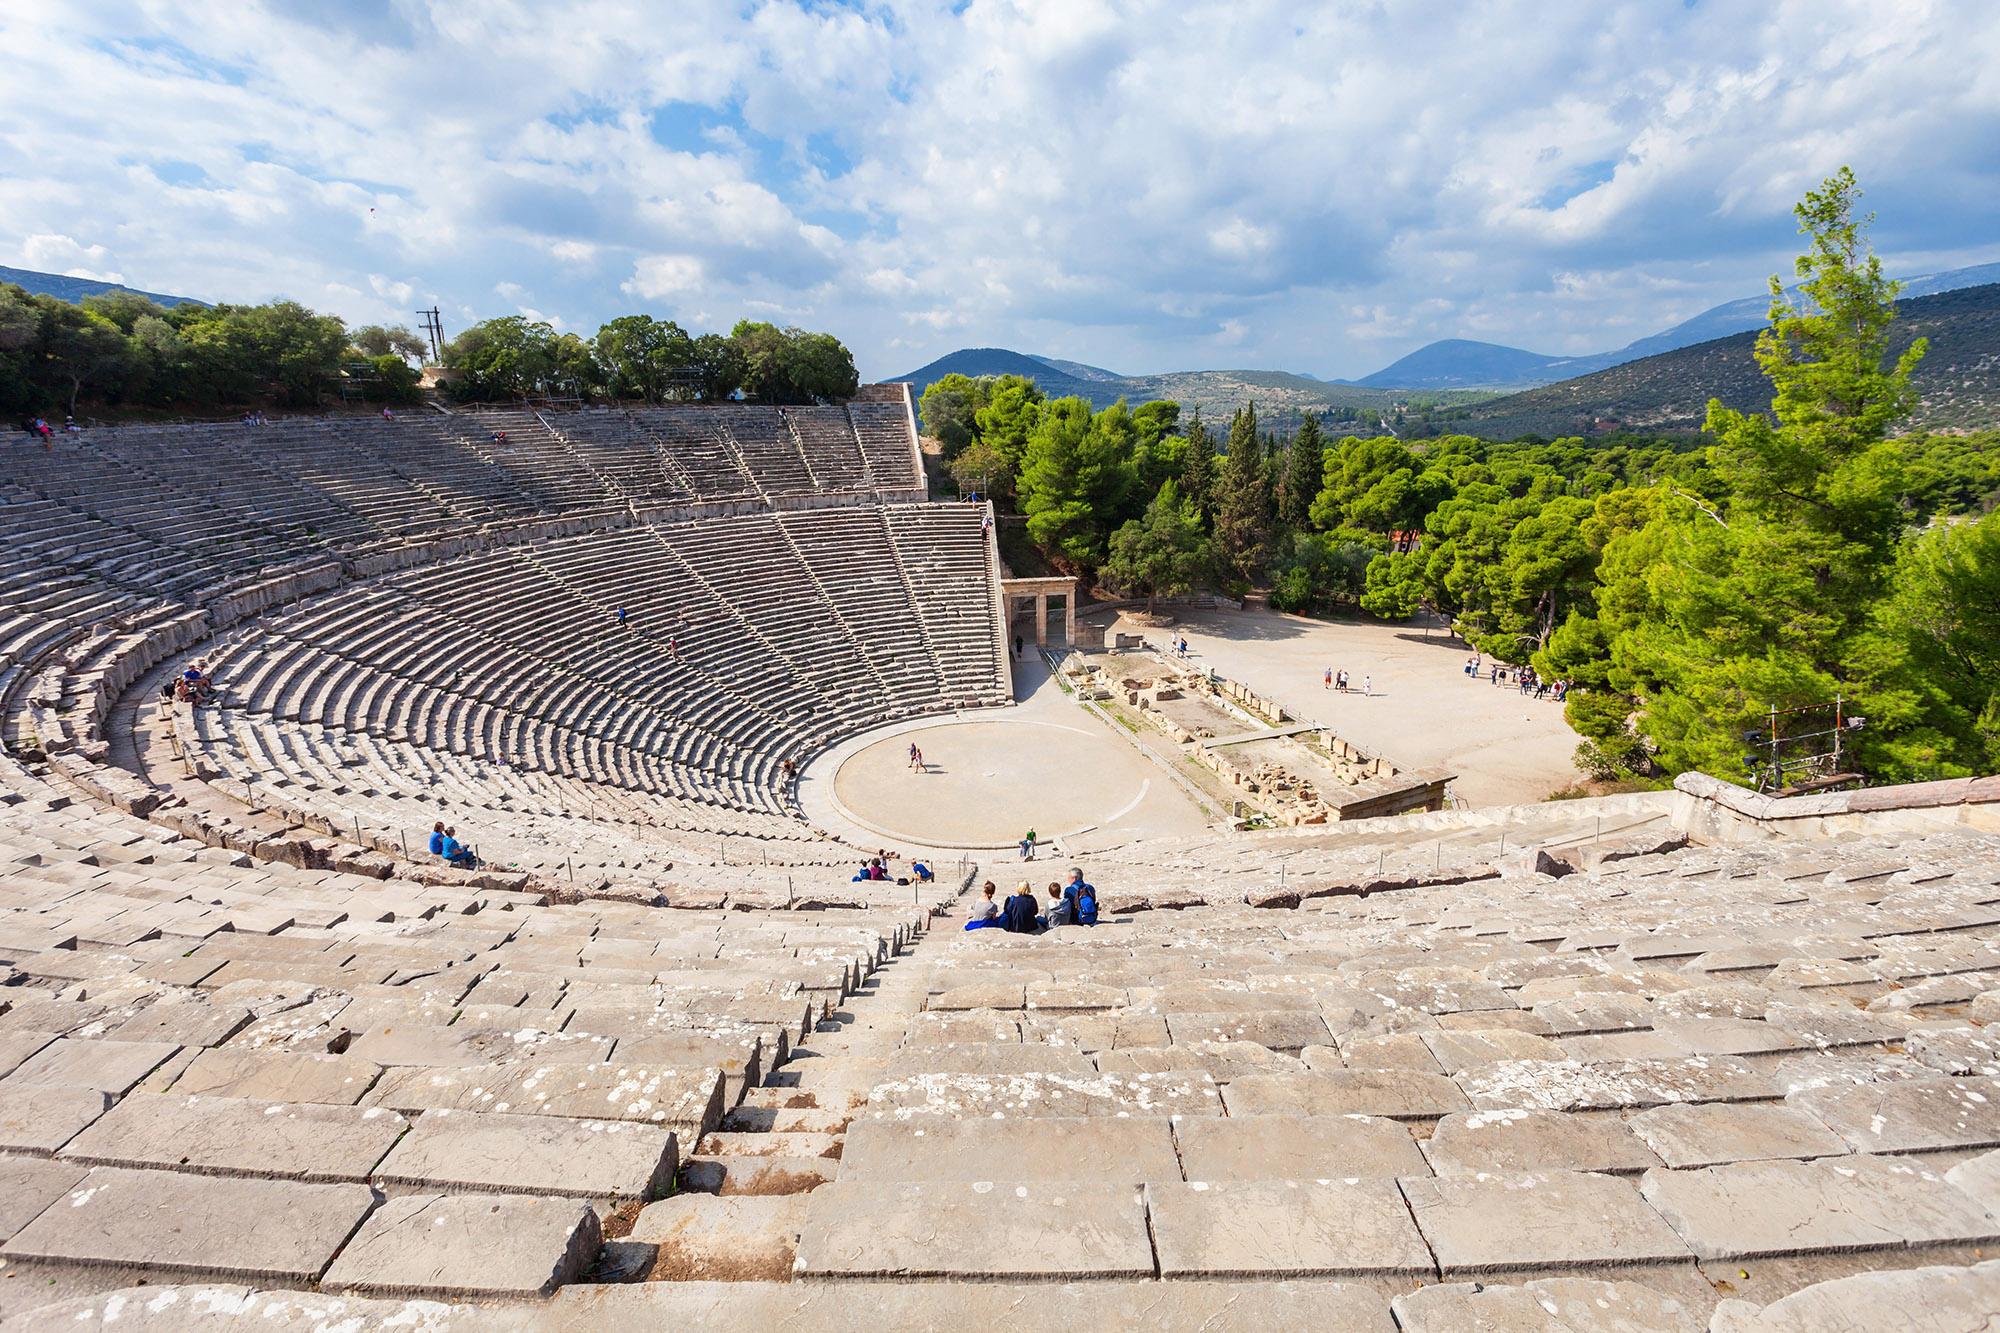 The Epidaurus Ancient Theatre is dedicated to the ancient Greek God of medicine, Asclepius.- © saiko3p / Shutterstock